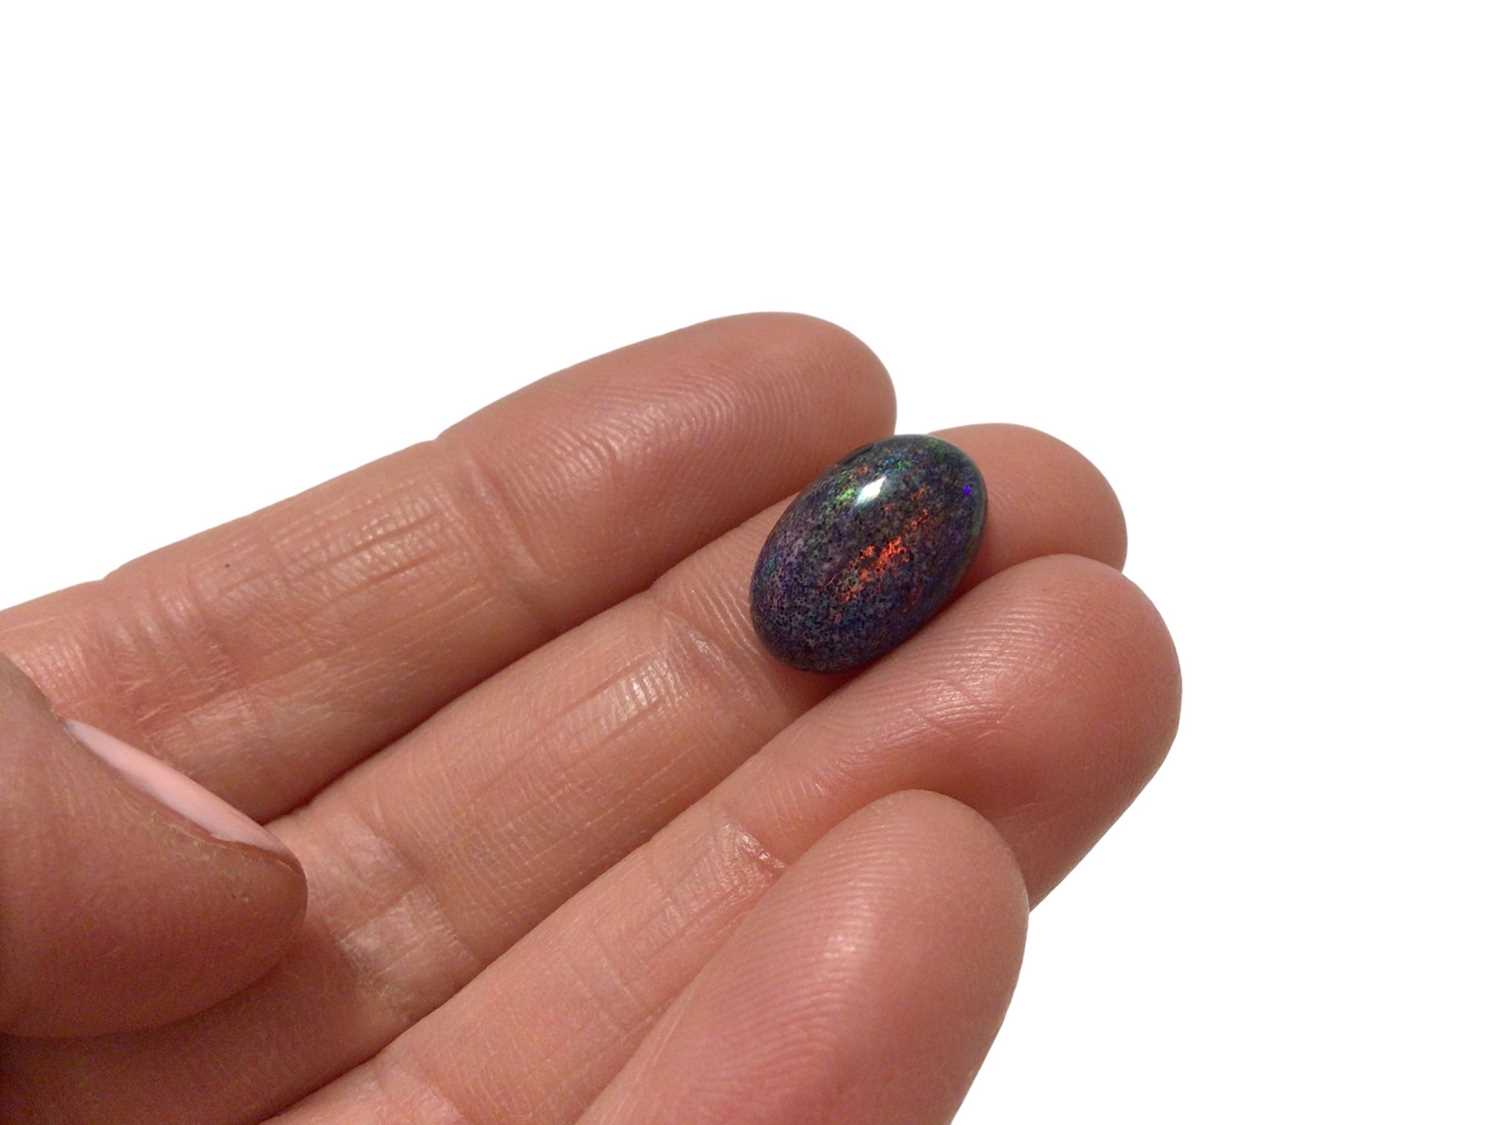 Unmounted black opal cabochon - Image 5 of 6